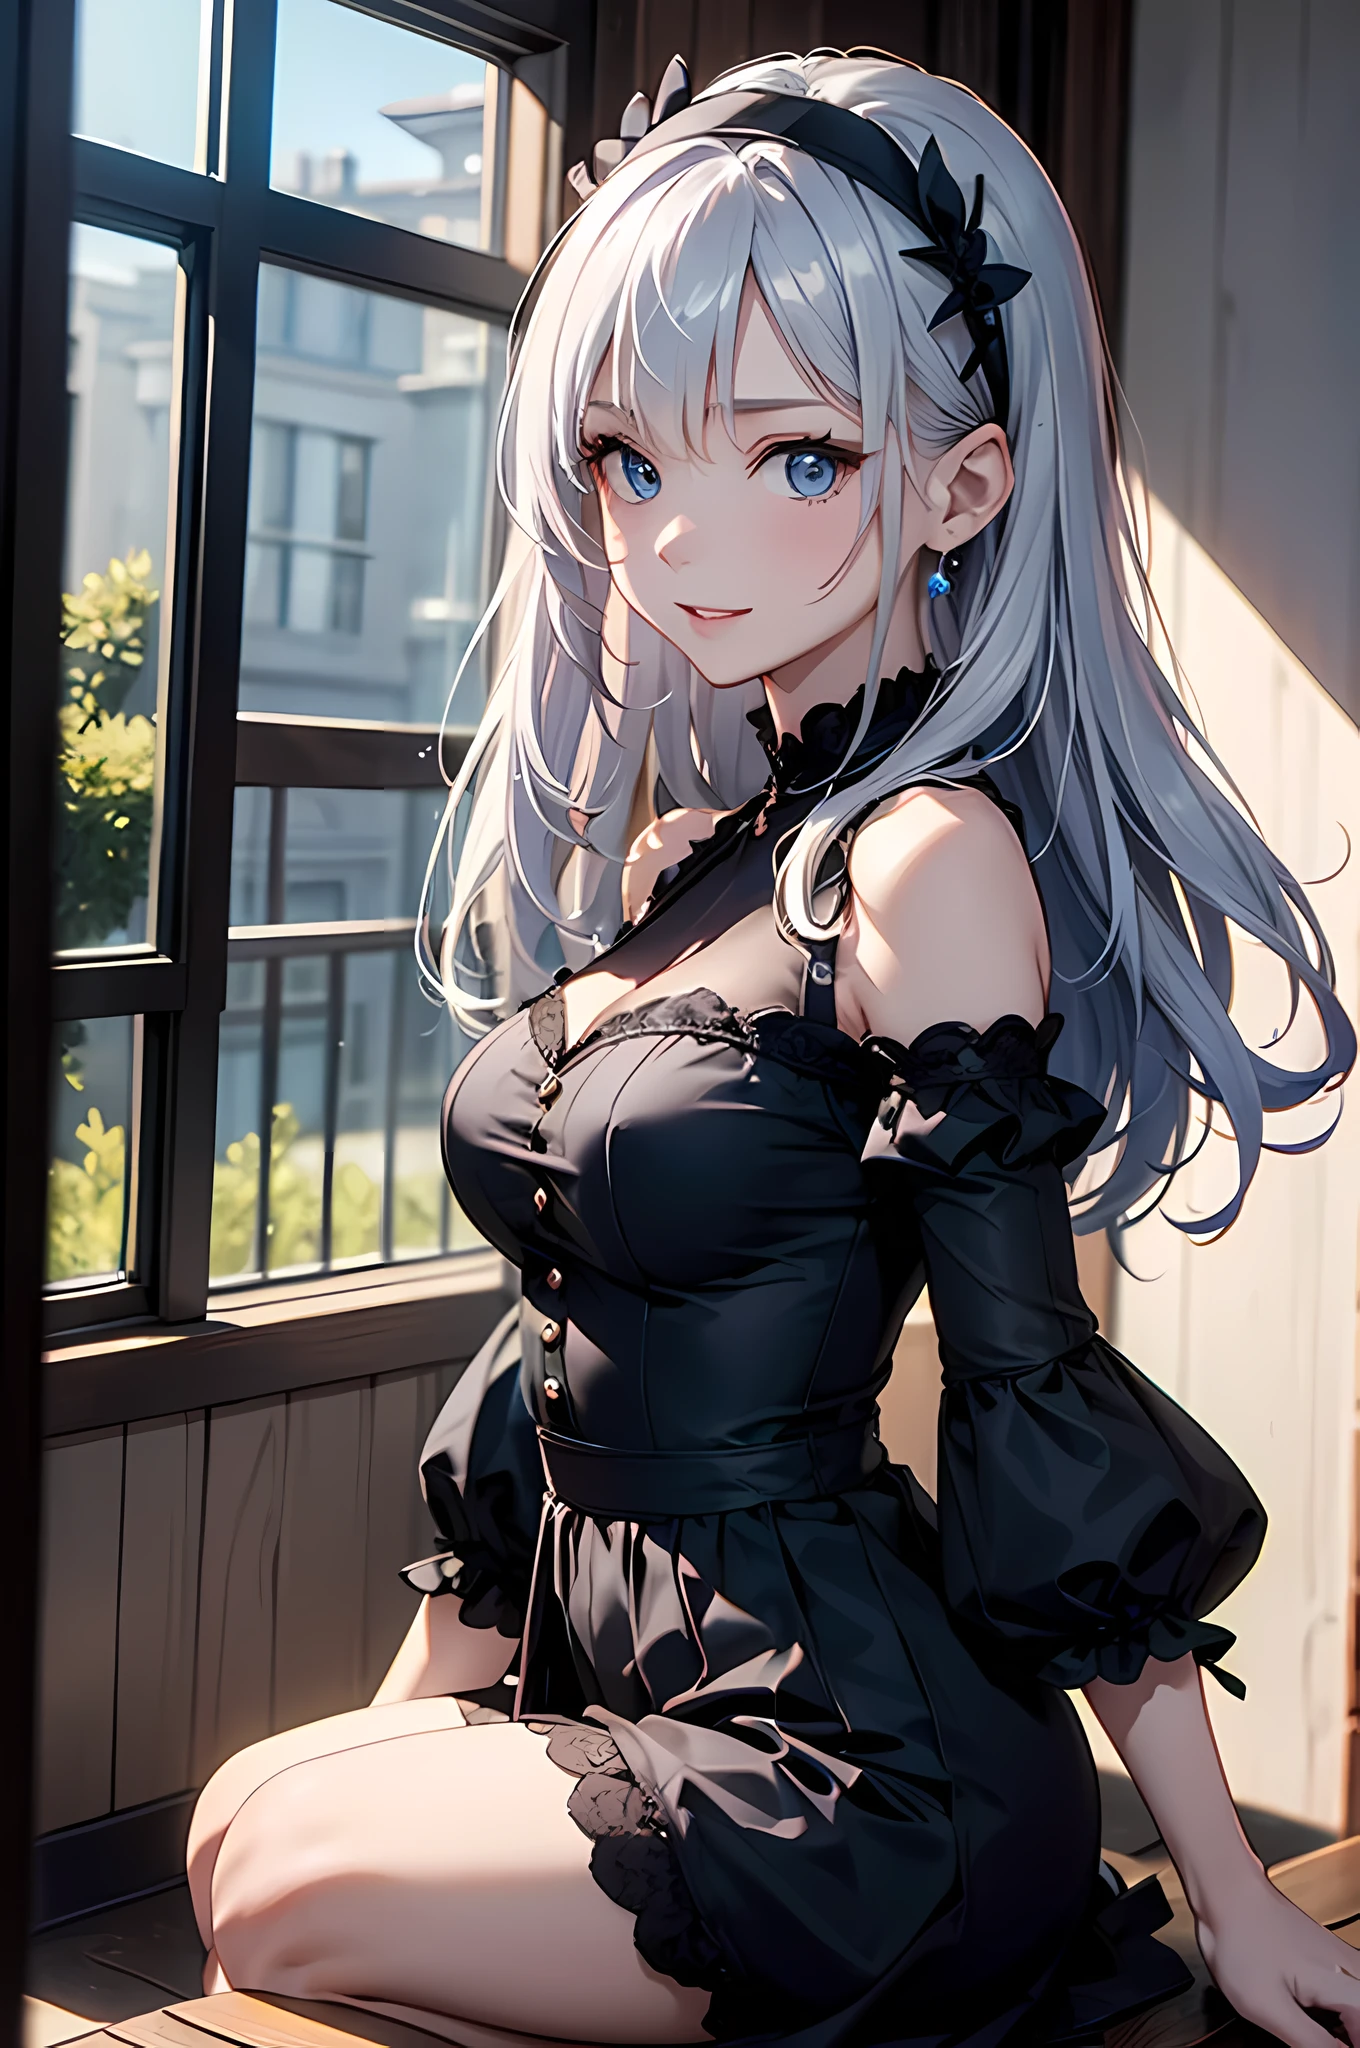 (best masterpiece, highest quality, highest quality,official art),(mature woman:1.3),(attractive woman made),((masterpiece, highest quality))、8K、one woman、（(30 years old)）、((silver hair))、long hair、messy hair、attractive woman、blue eyes、Big eyes、sparkling eyes、Beautifully drawn eyes、smile、small bust、Black Gothic Maid、((white headband))、(look back)、(Knee to head:1.3)、Entrance of a luxurious house、aerial perspective、pure、transparent、Light、Light、Light、